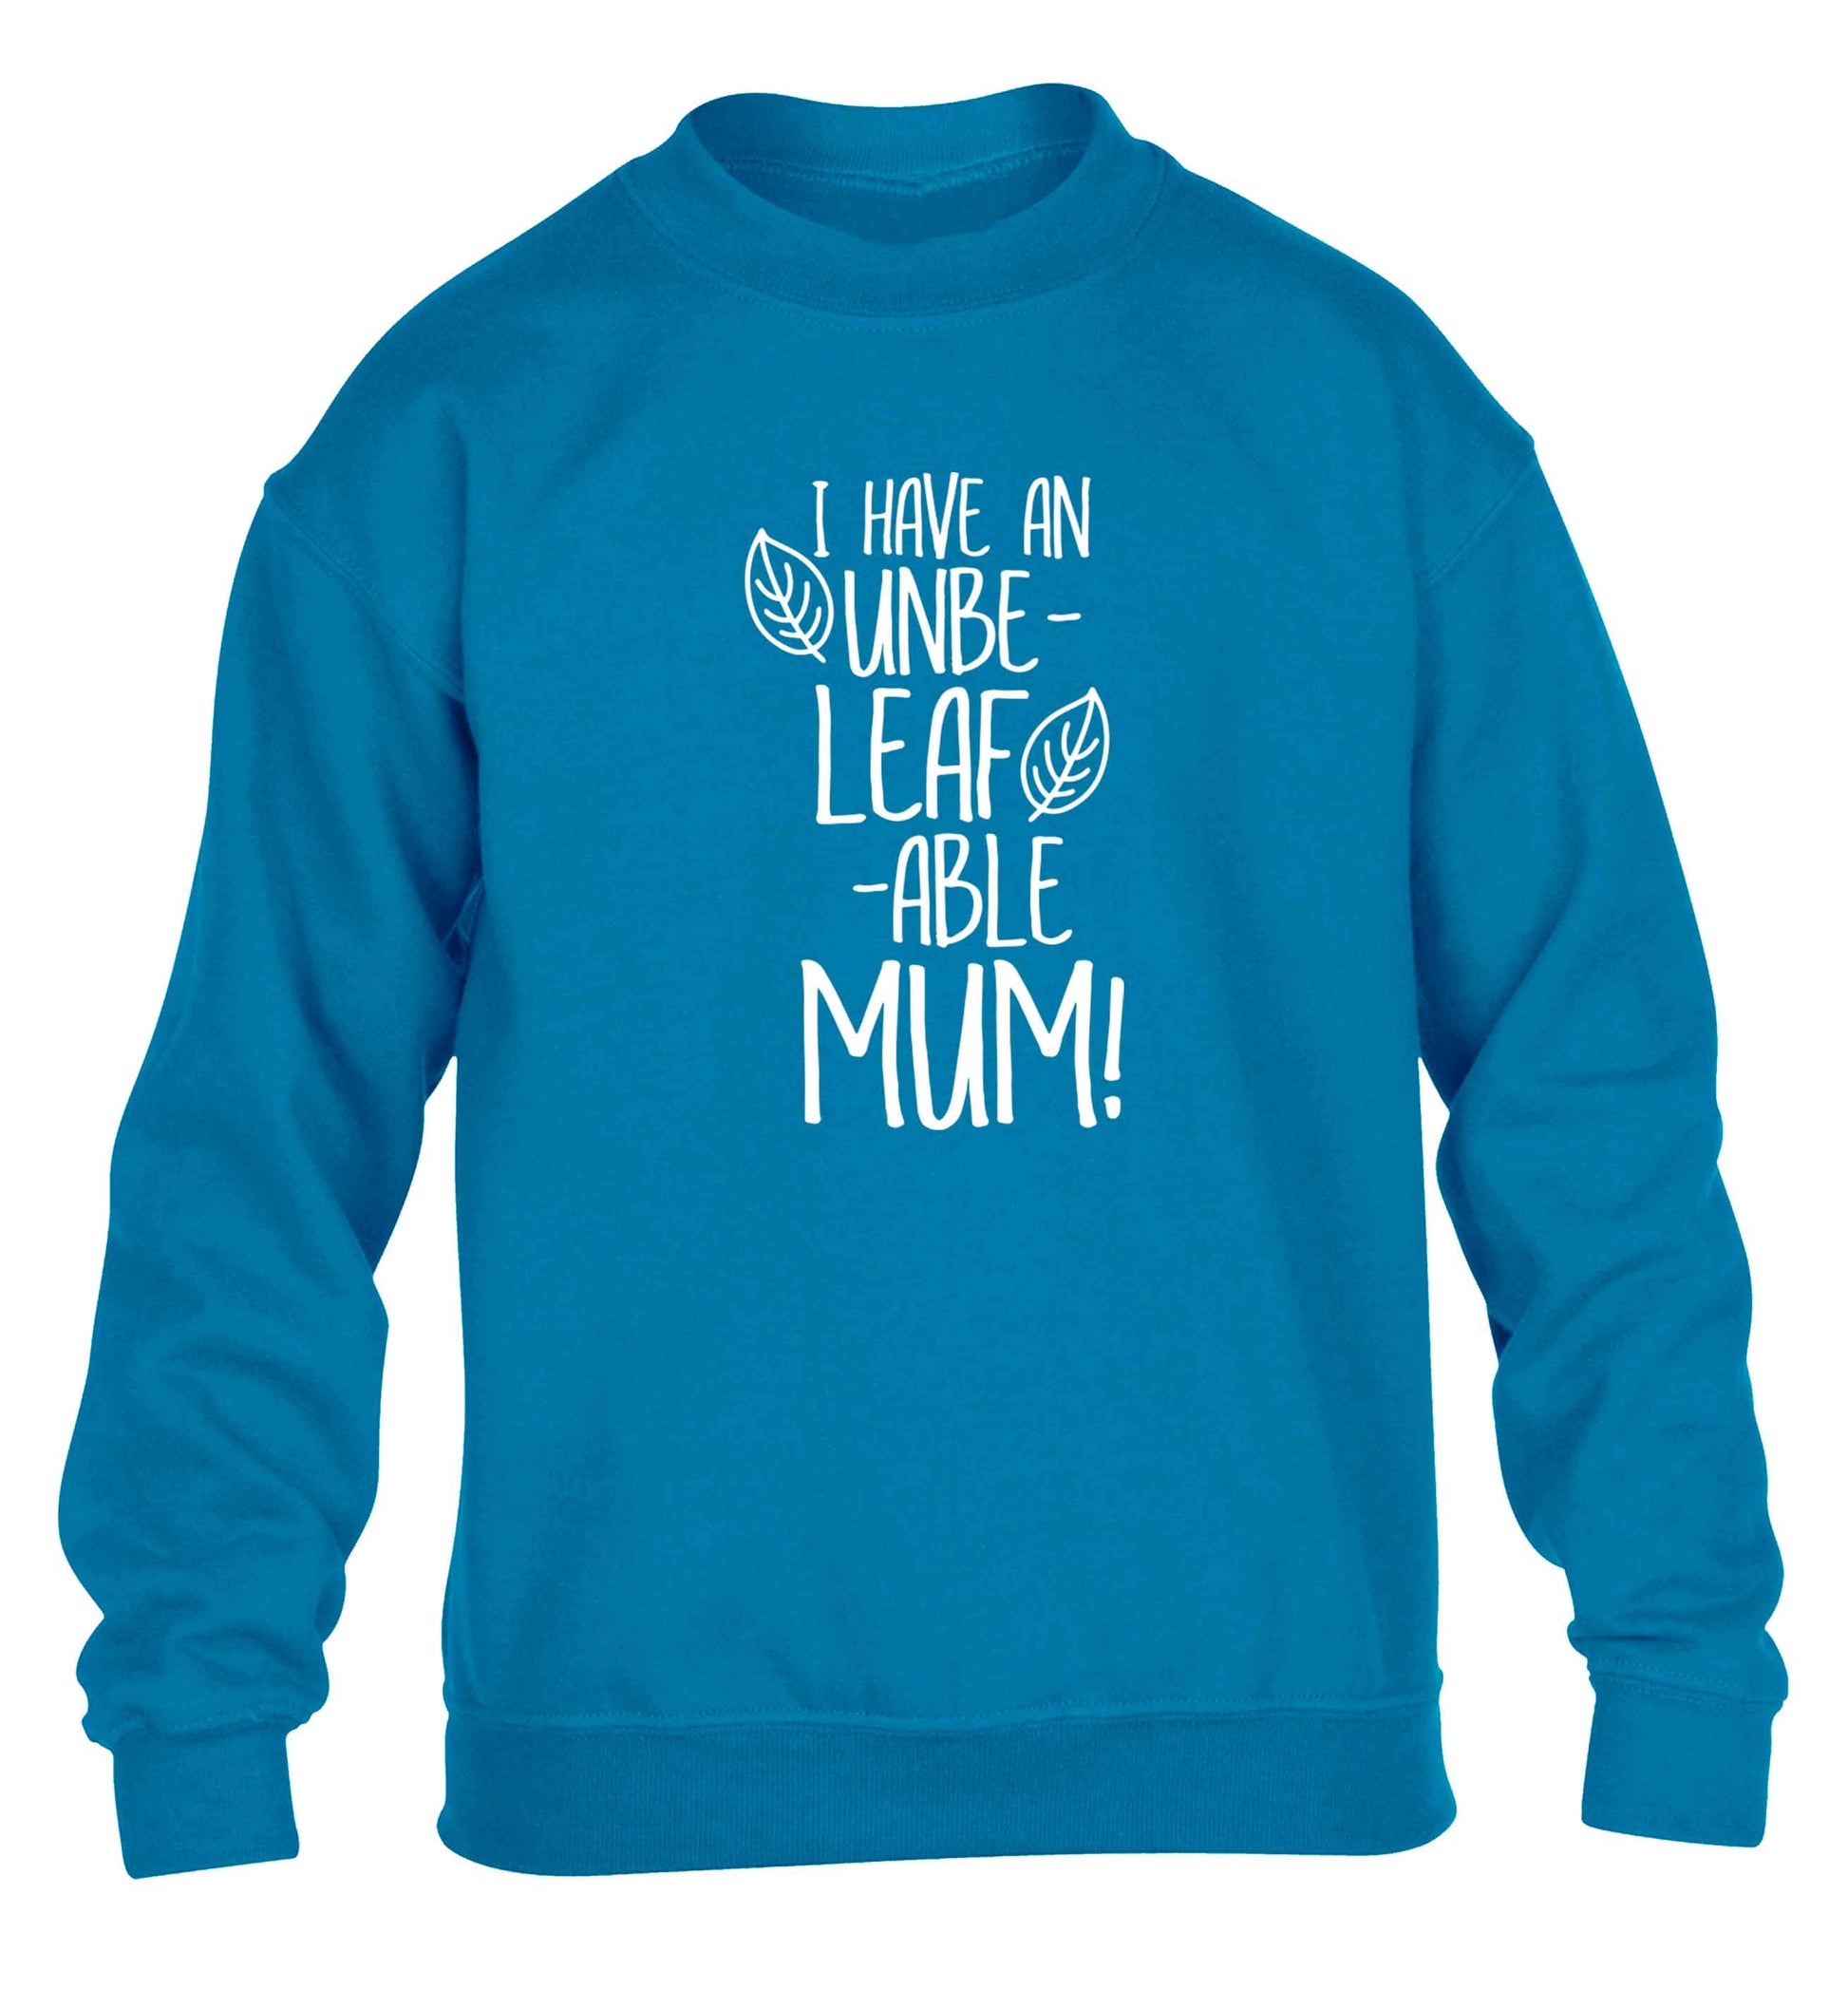 I have an unbeleafable mum! children's blue sweater 12-13 Years